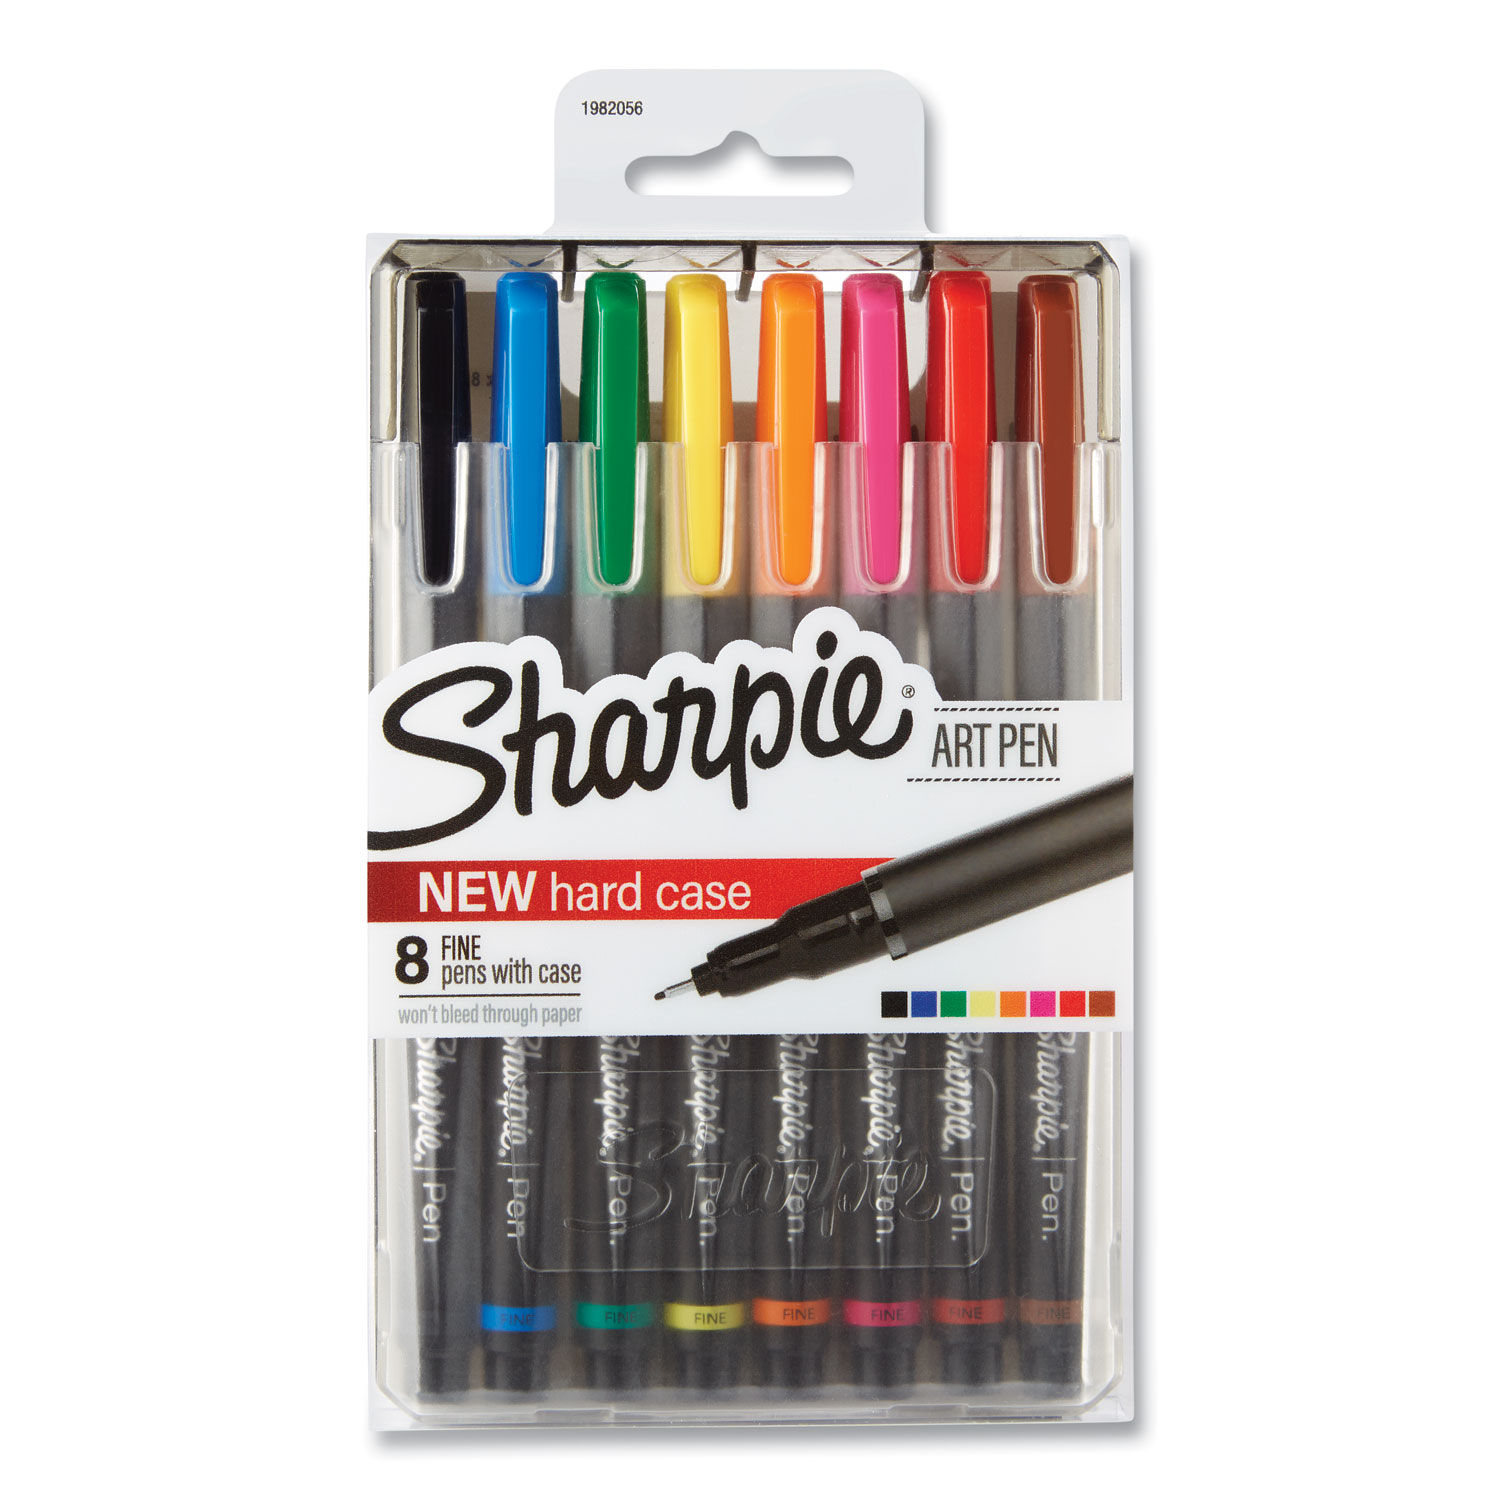 easy colorful sharpie designs